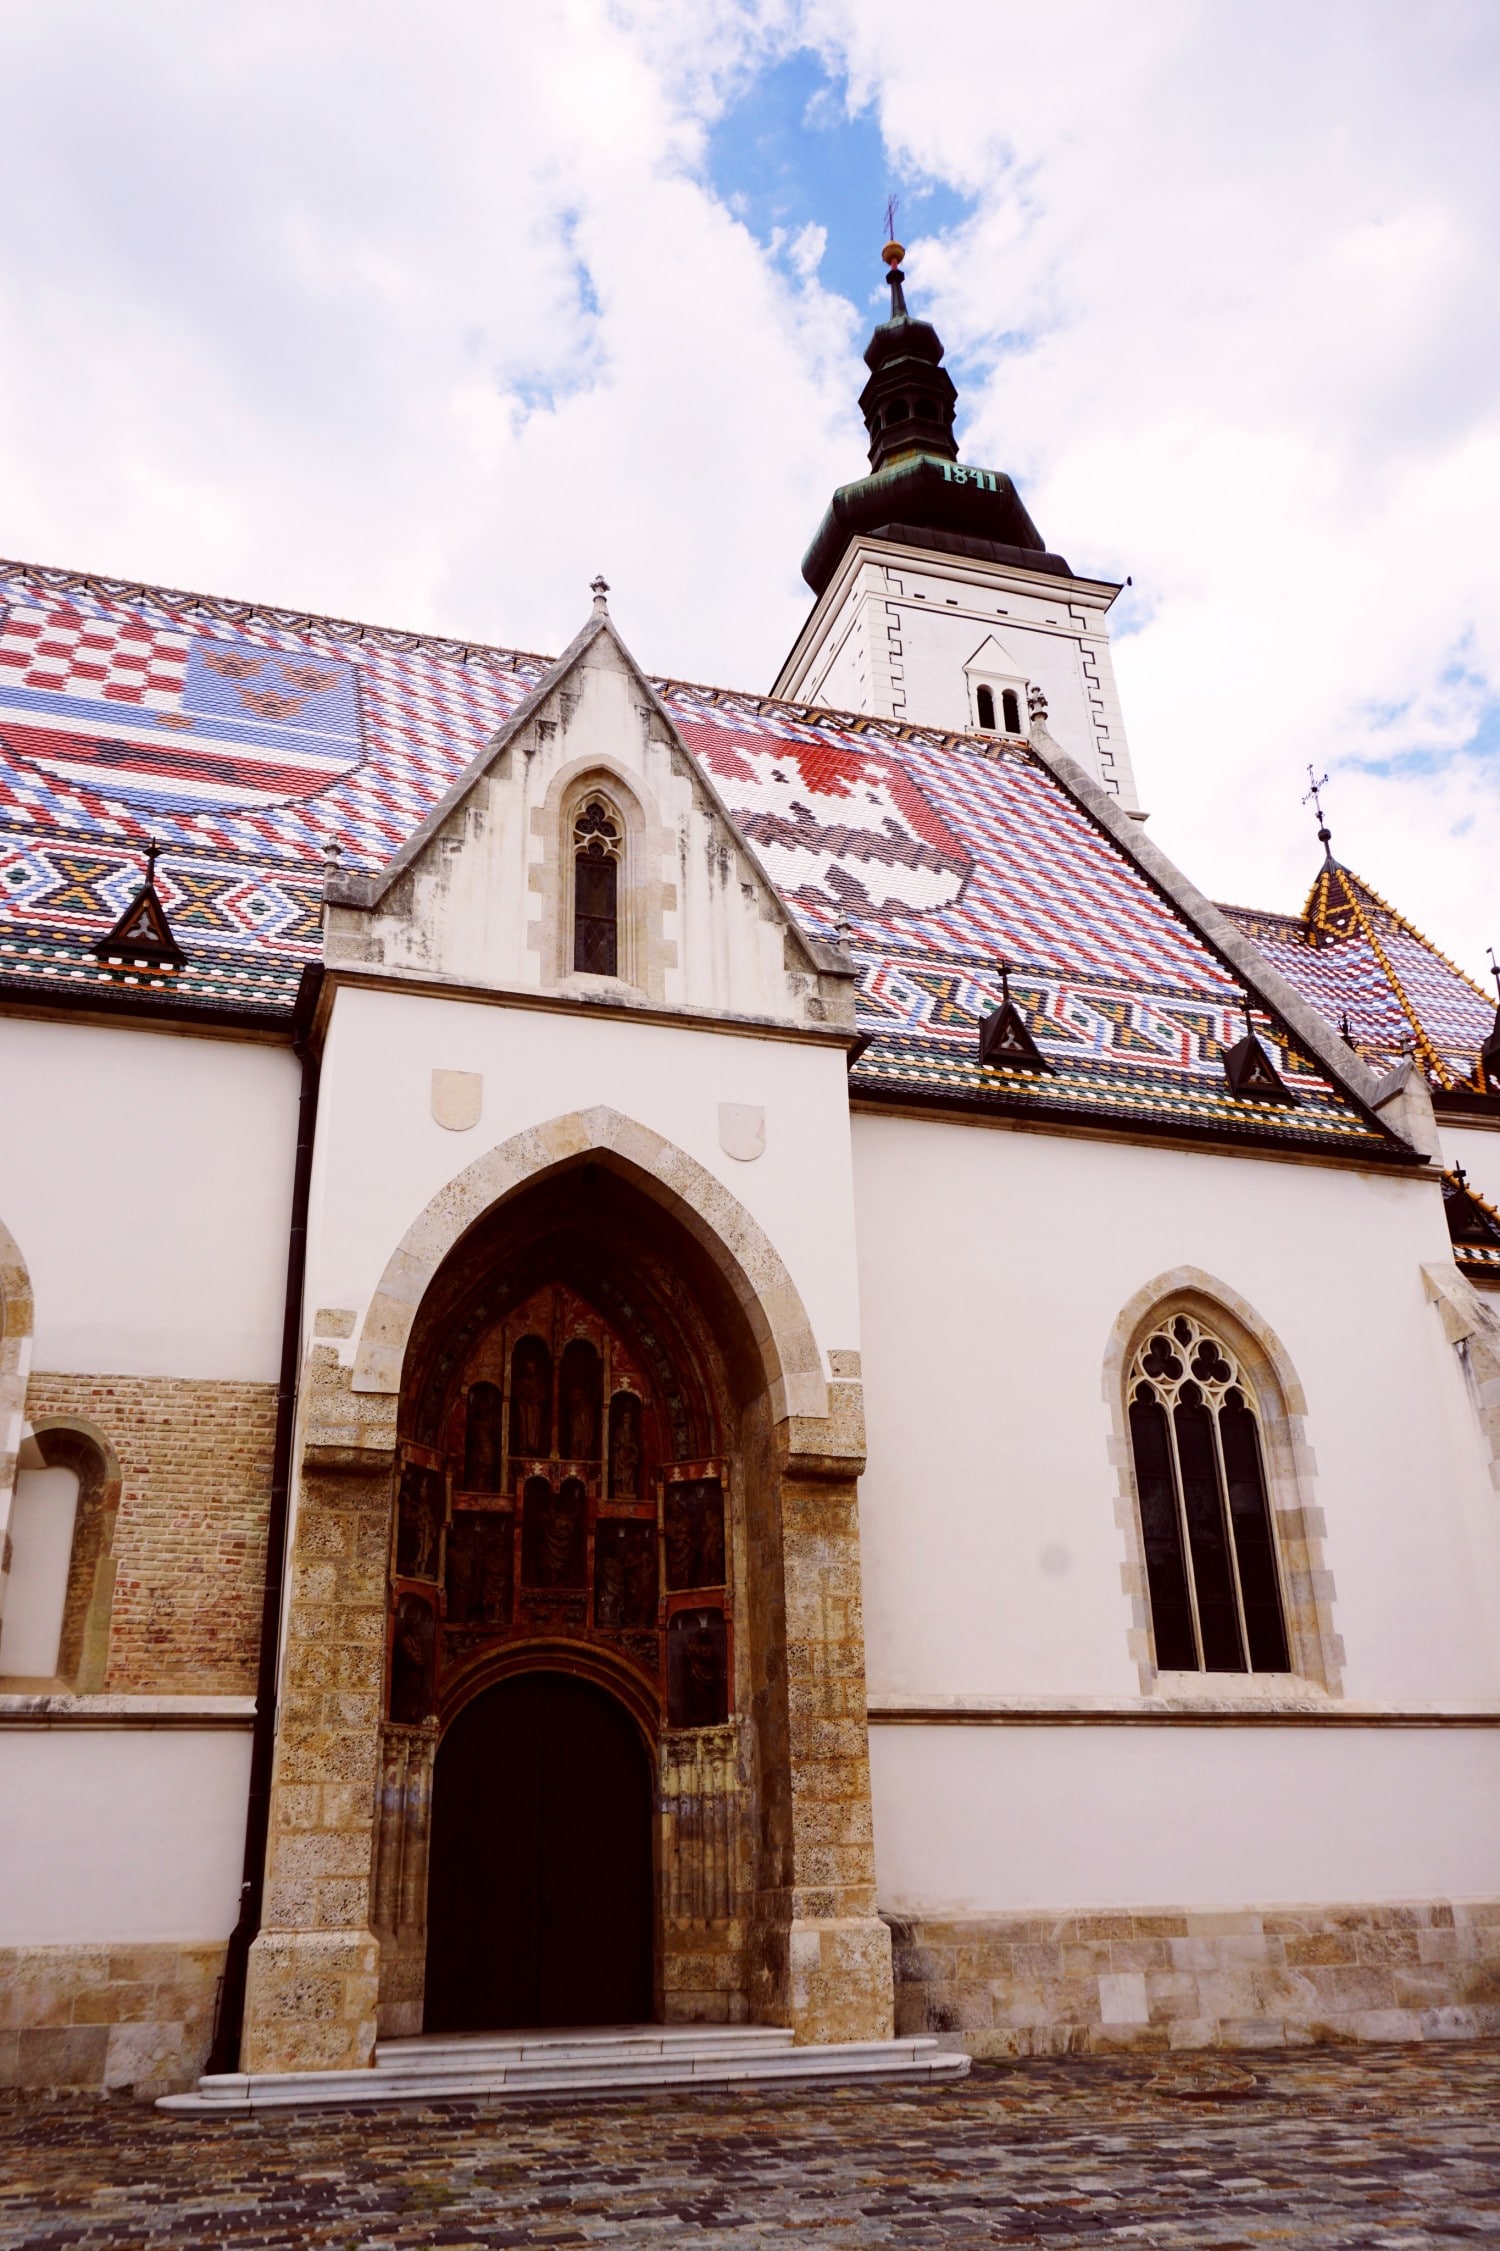 St Mark's Church should be at the top of your list of what to see in one day in Zagreb. Here's why.